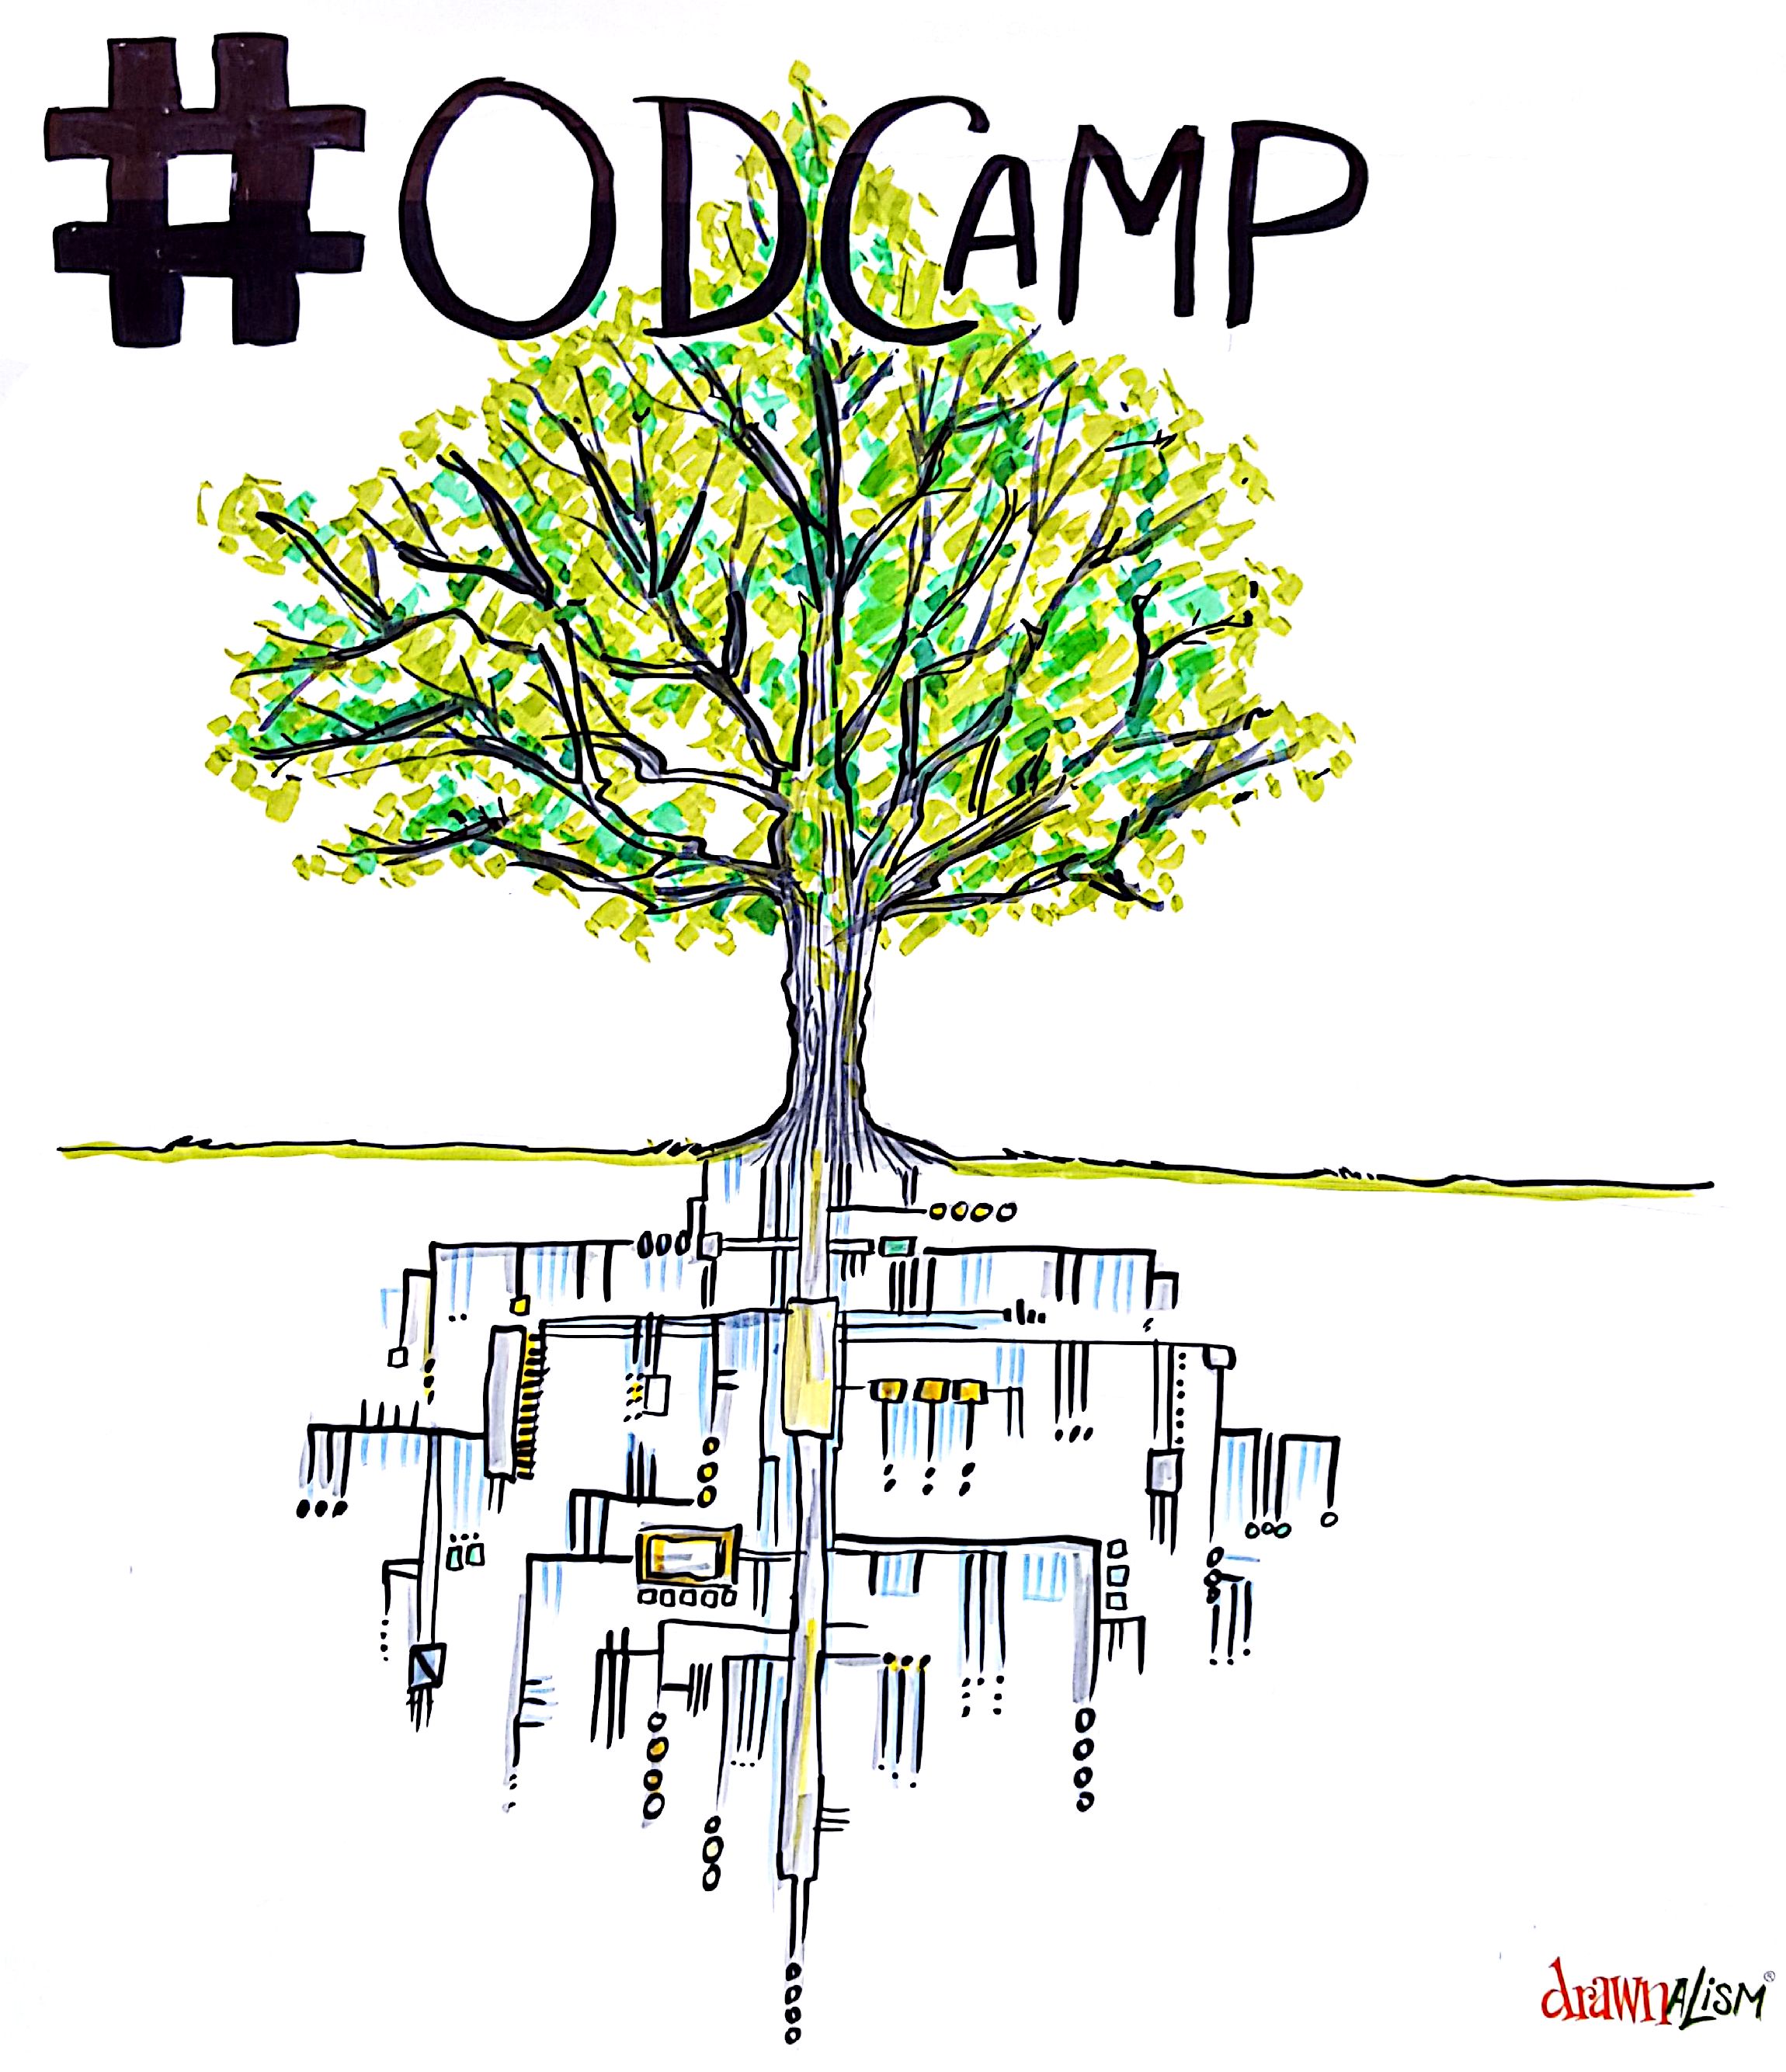 A Shed load of ideas – Open Data Camp 2